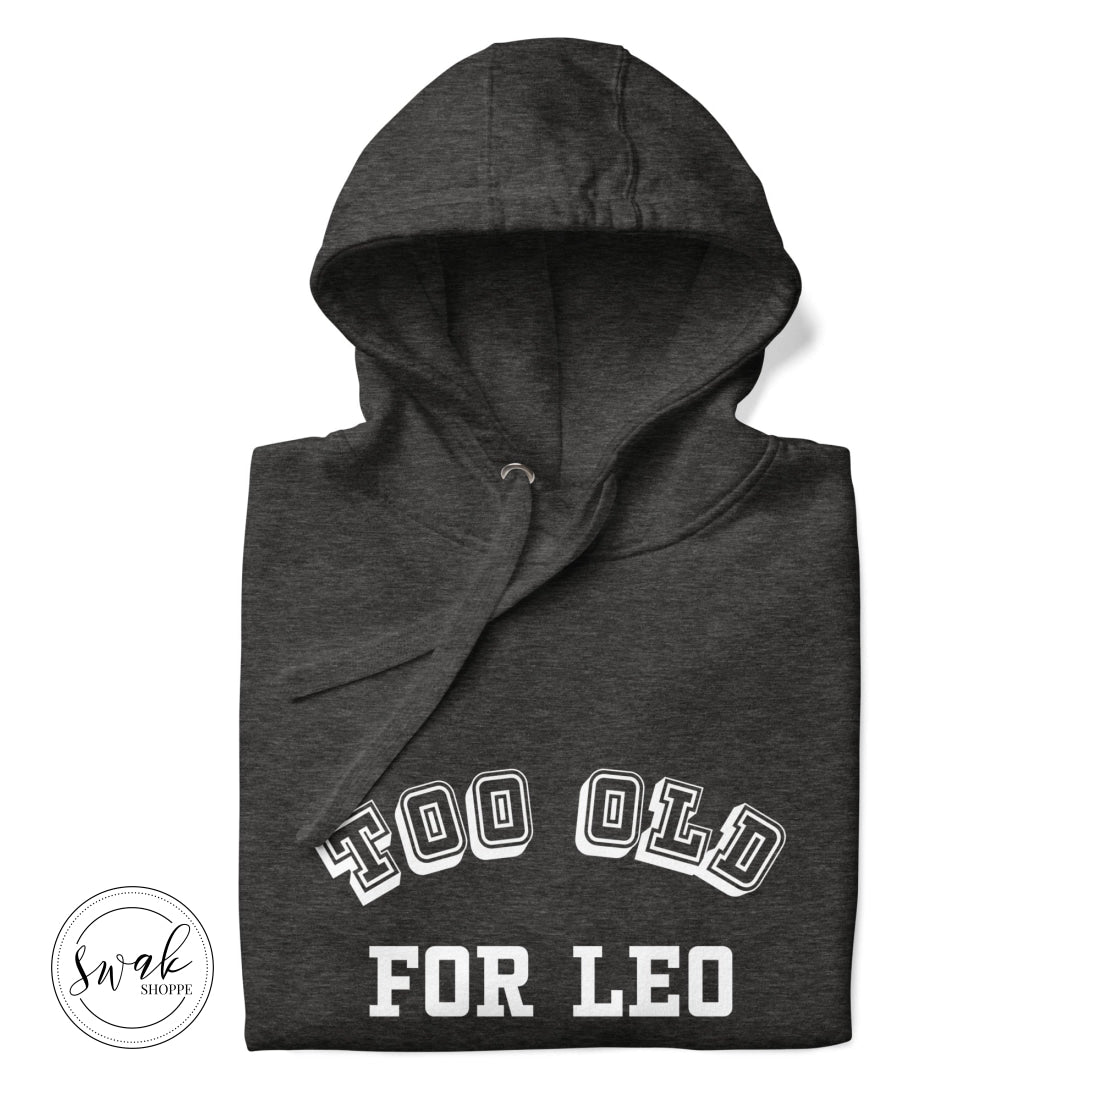 Too Old For Leo Collegiate White Logo Unisex Hoodie Charcoal Heather / S